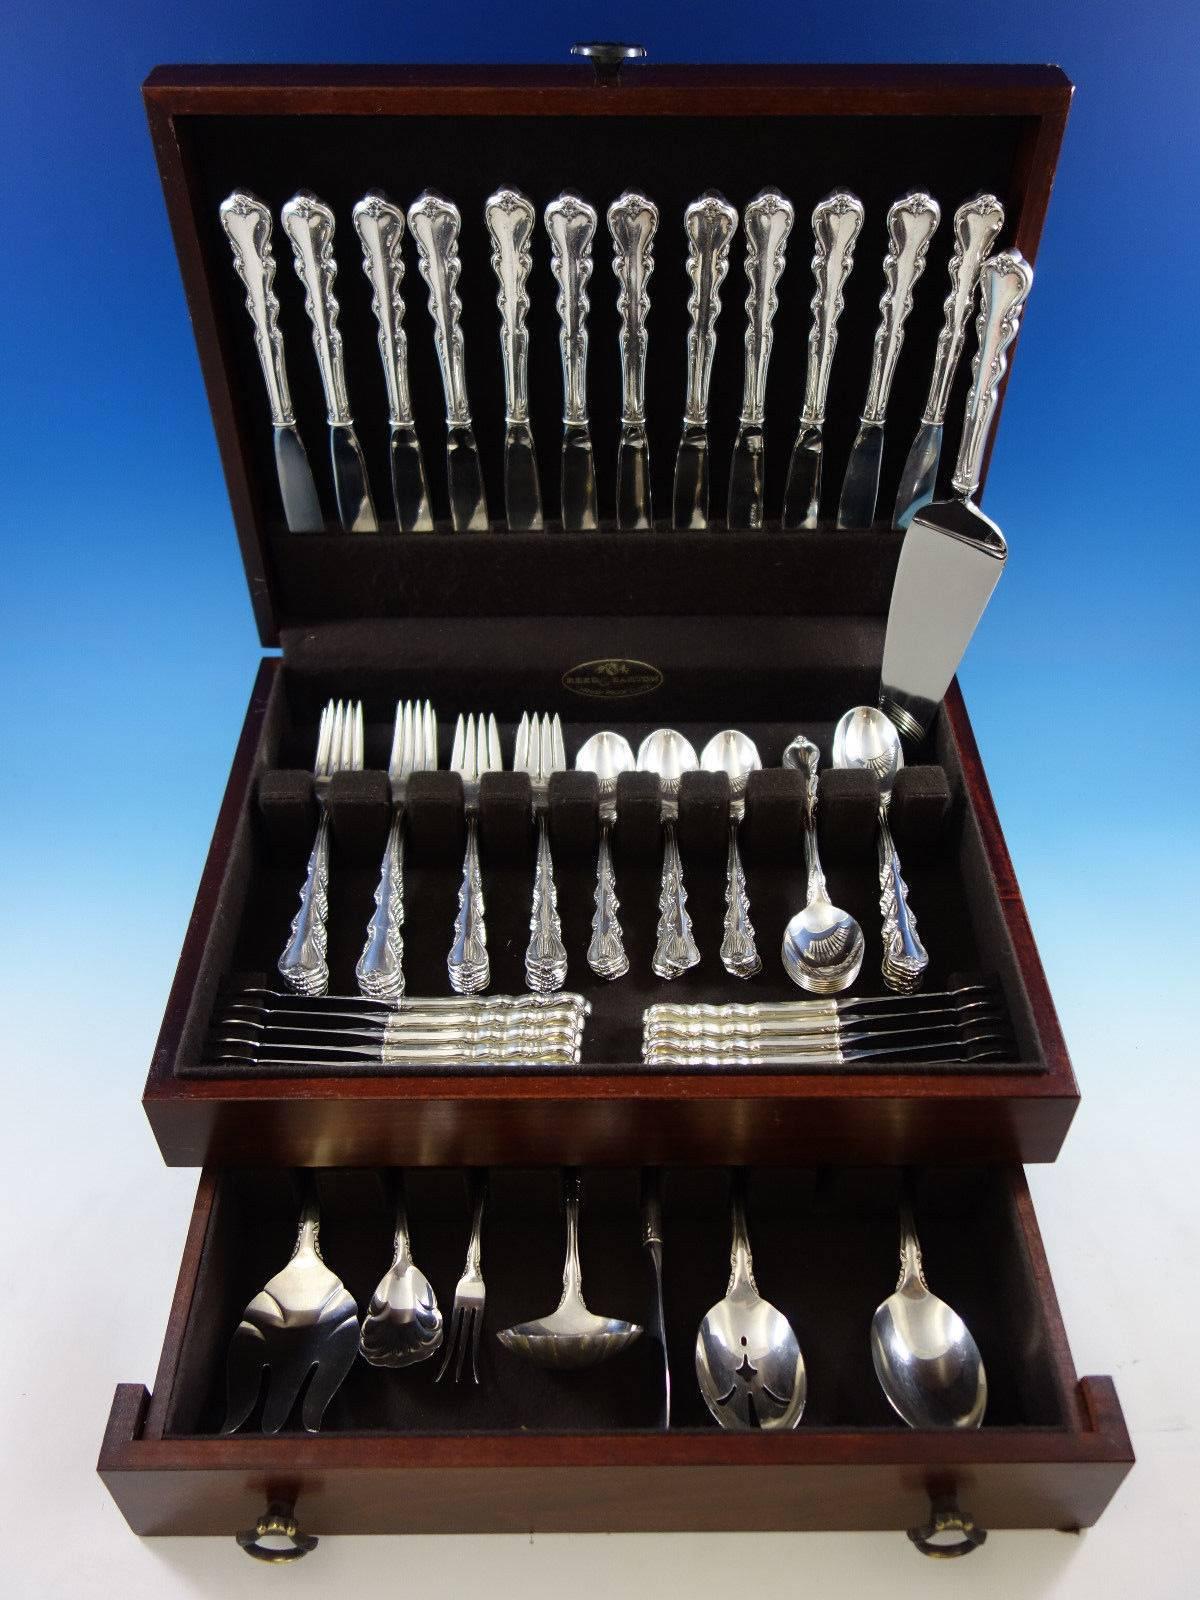 Angelique by International sterling silver flatware set, 80 pieces. This set includes: 

12 knives, 9 1/4